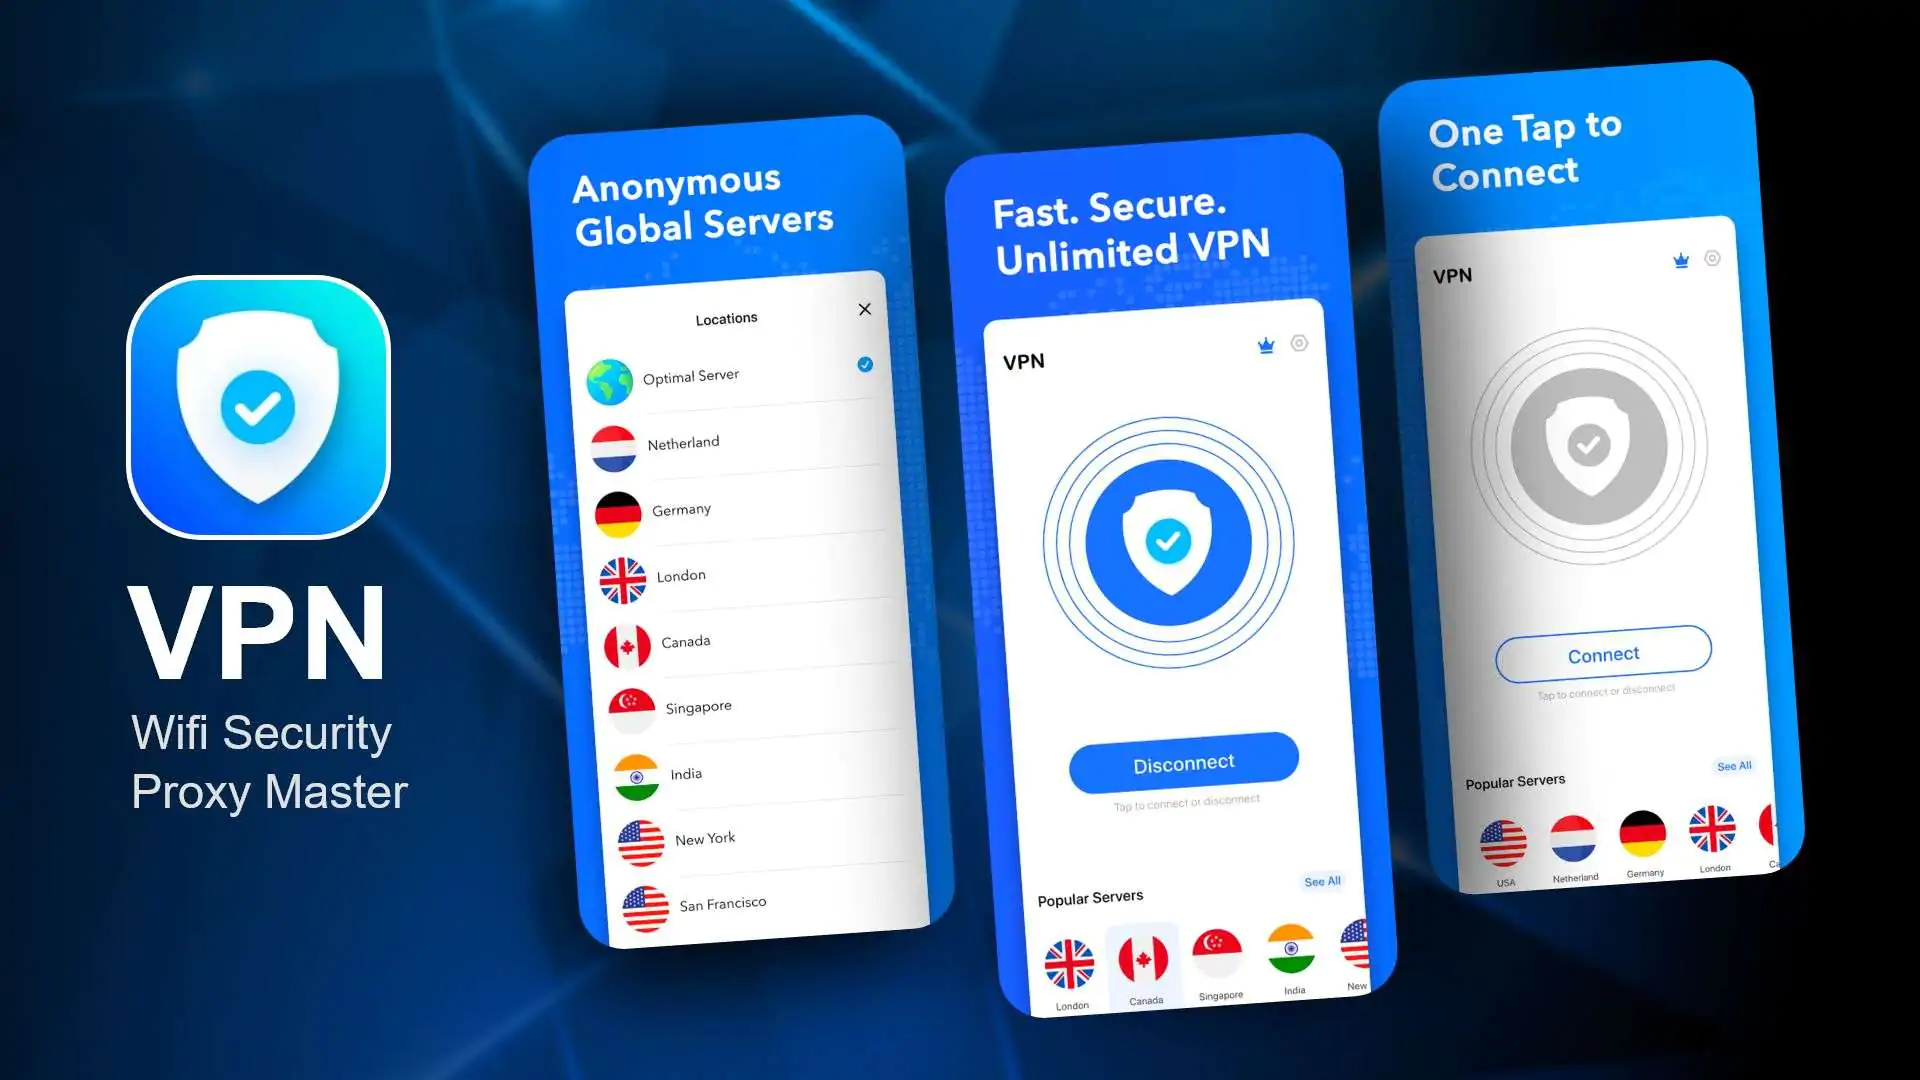 Illustration of a person using a VPN on an iPhone